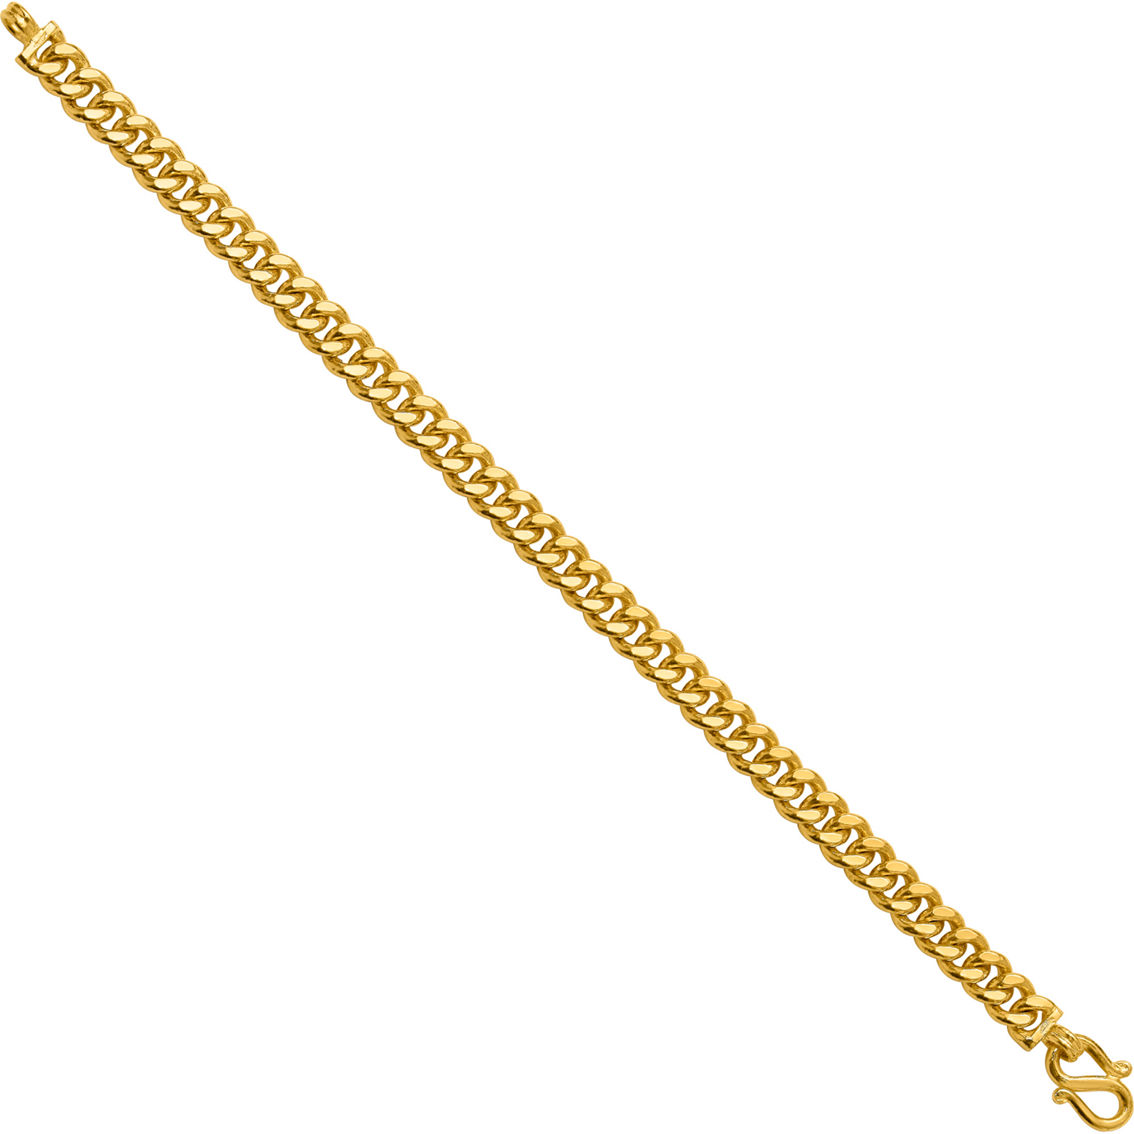 24K Pure Gold 7.2mm Solid Curb Chain 8 in. Bracelet - Image 3 of 5